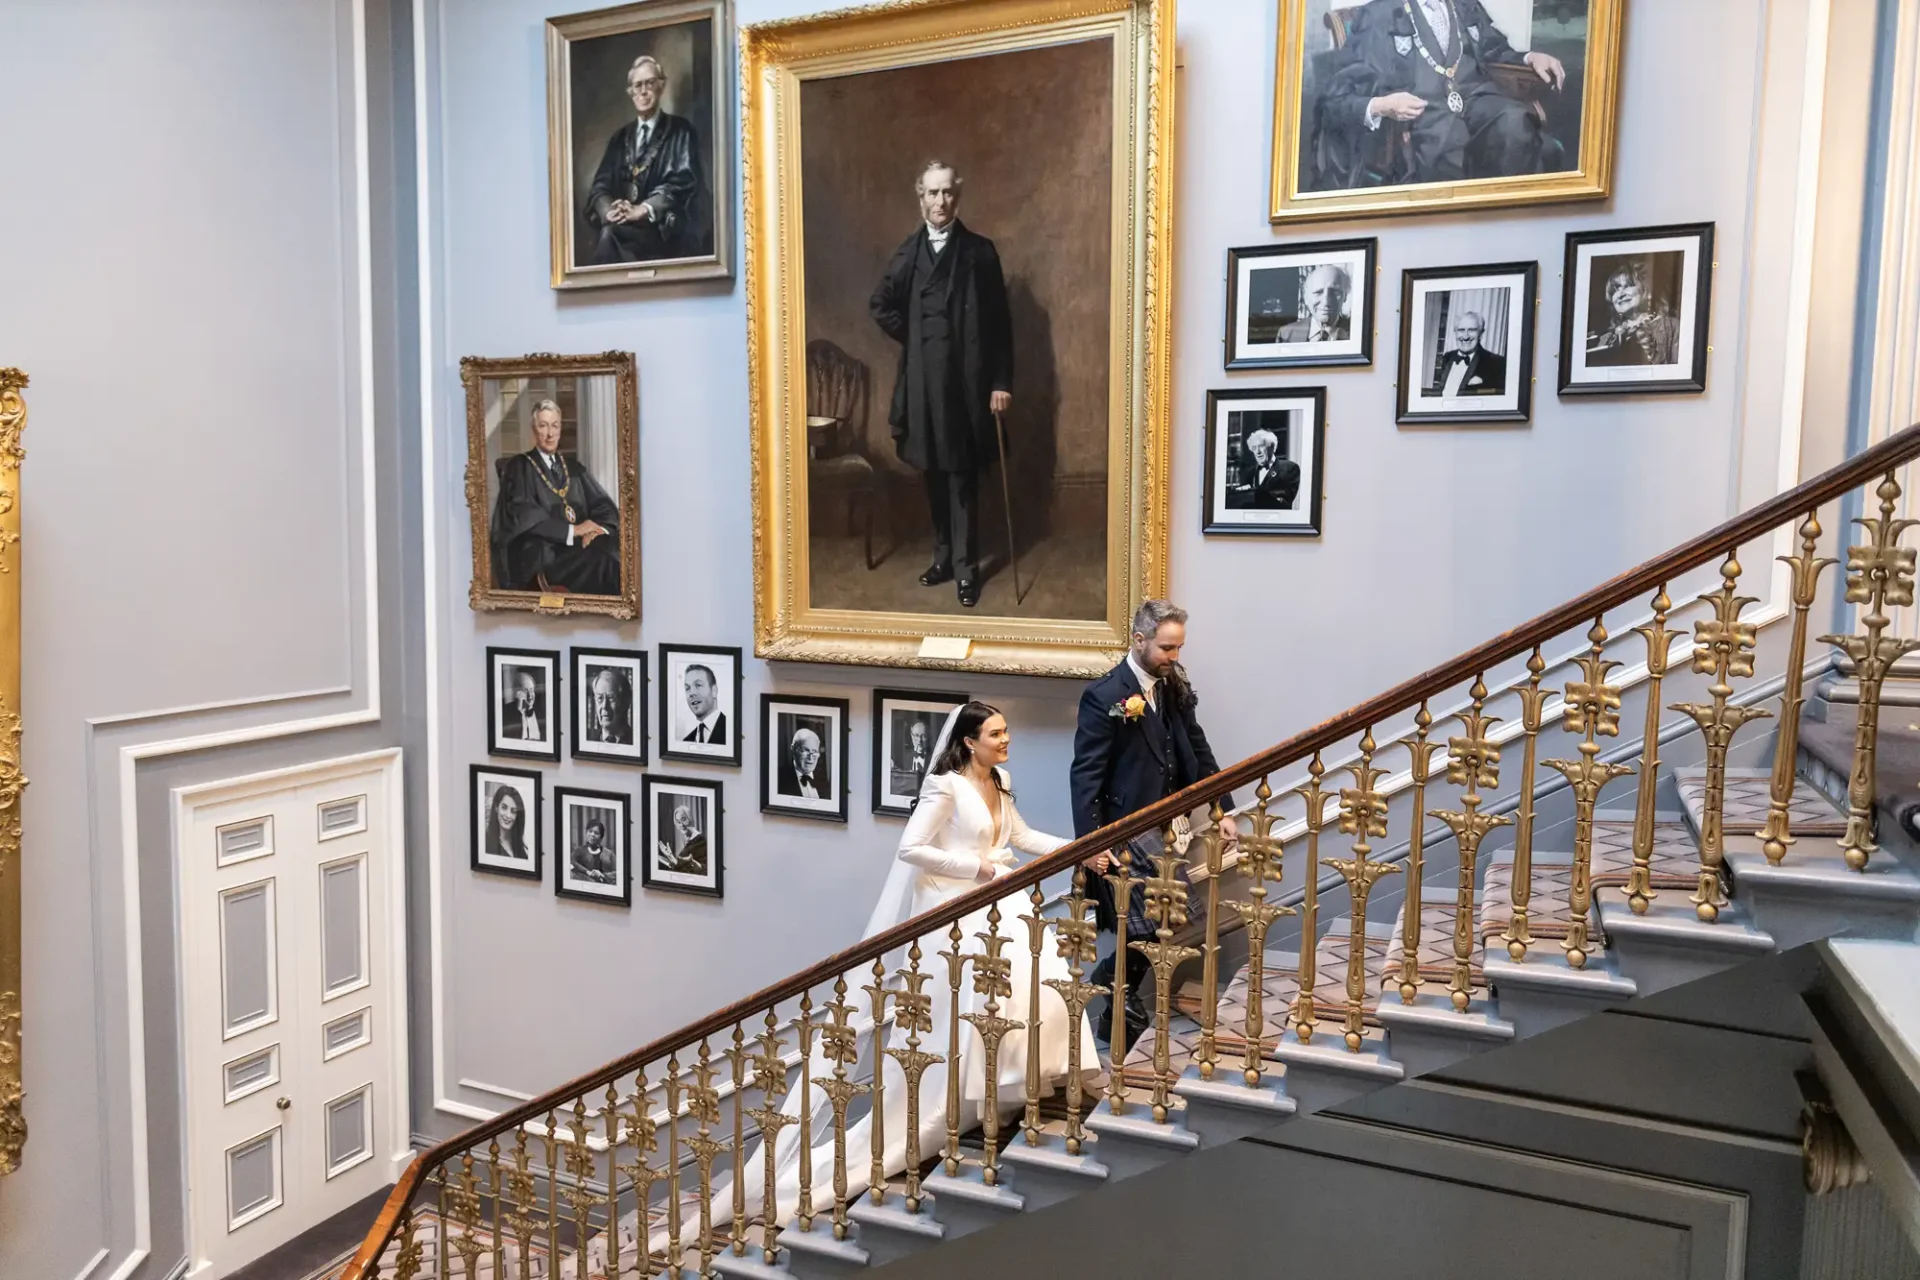 Two people ascending a grand staircase adorned with numerous framed portraits on the walls in a sophisticated gallery setting.